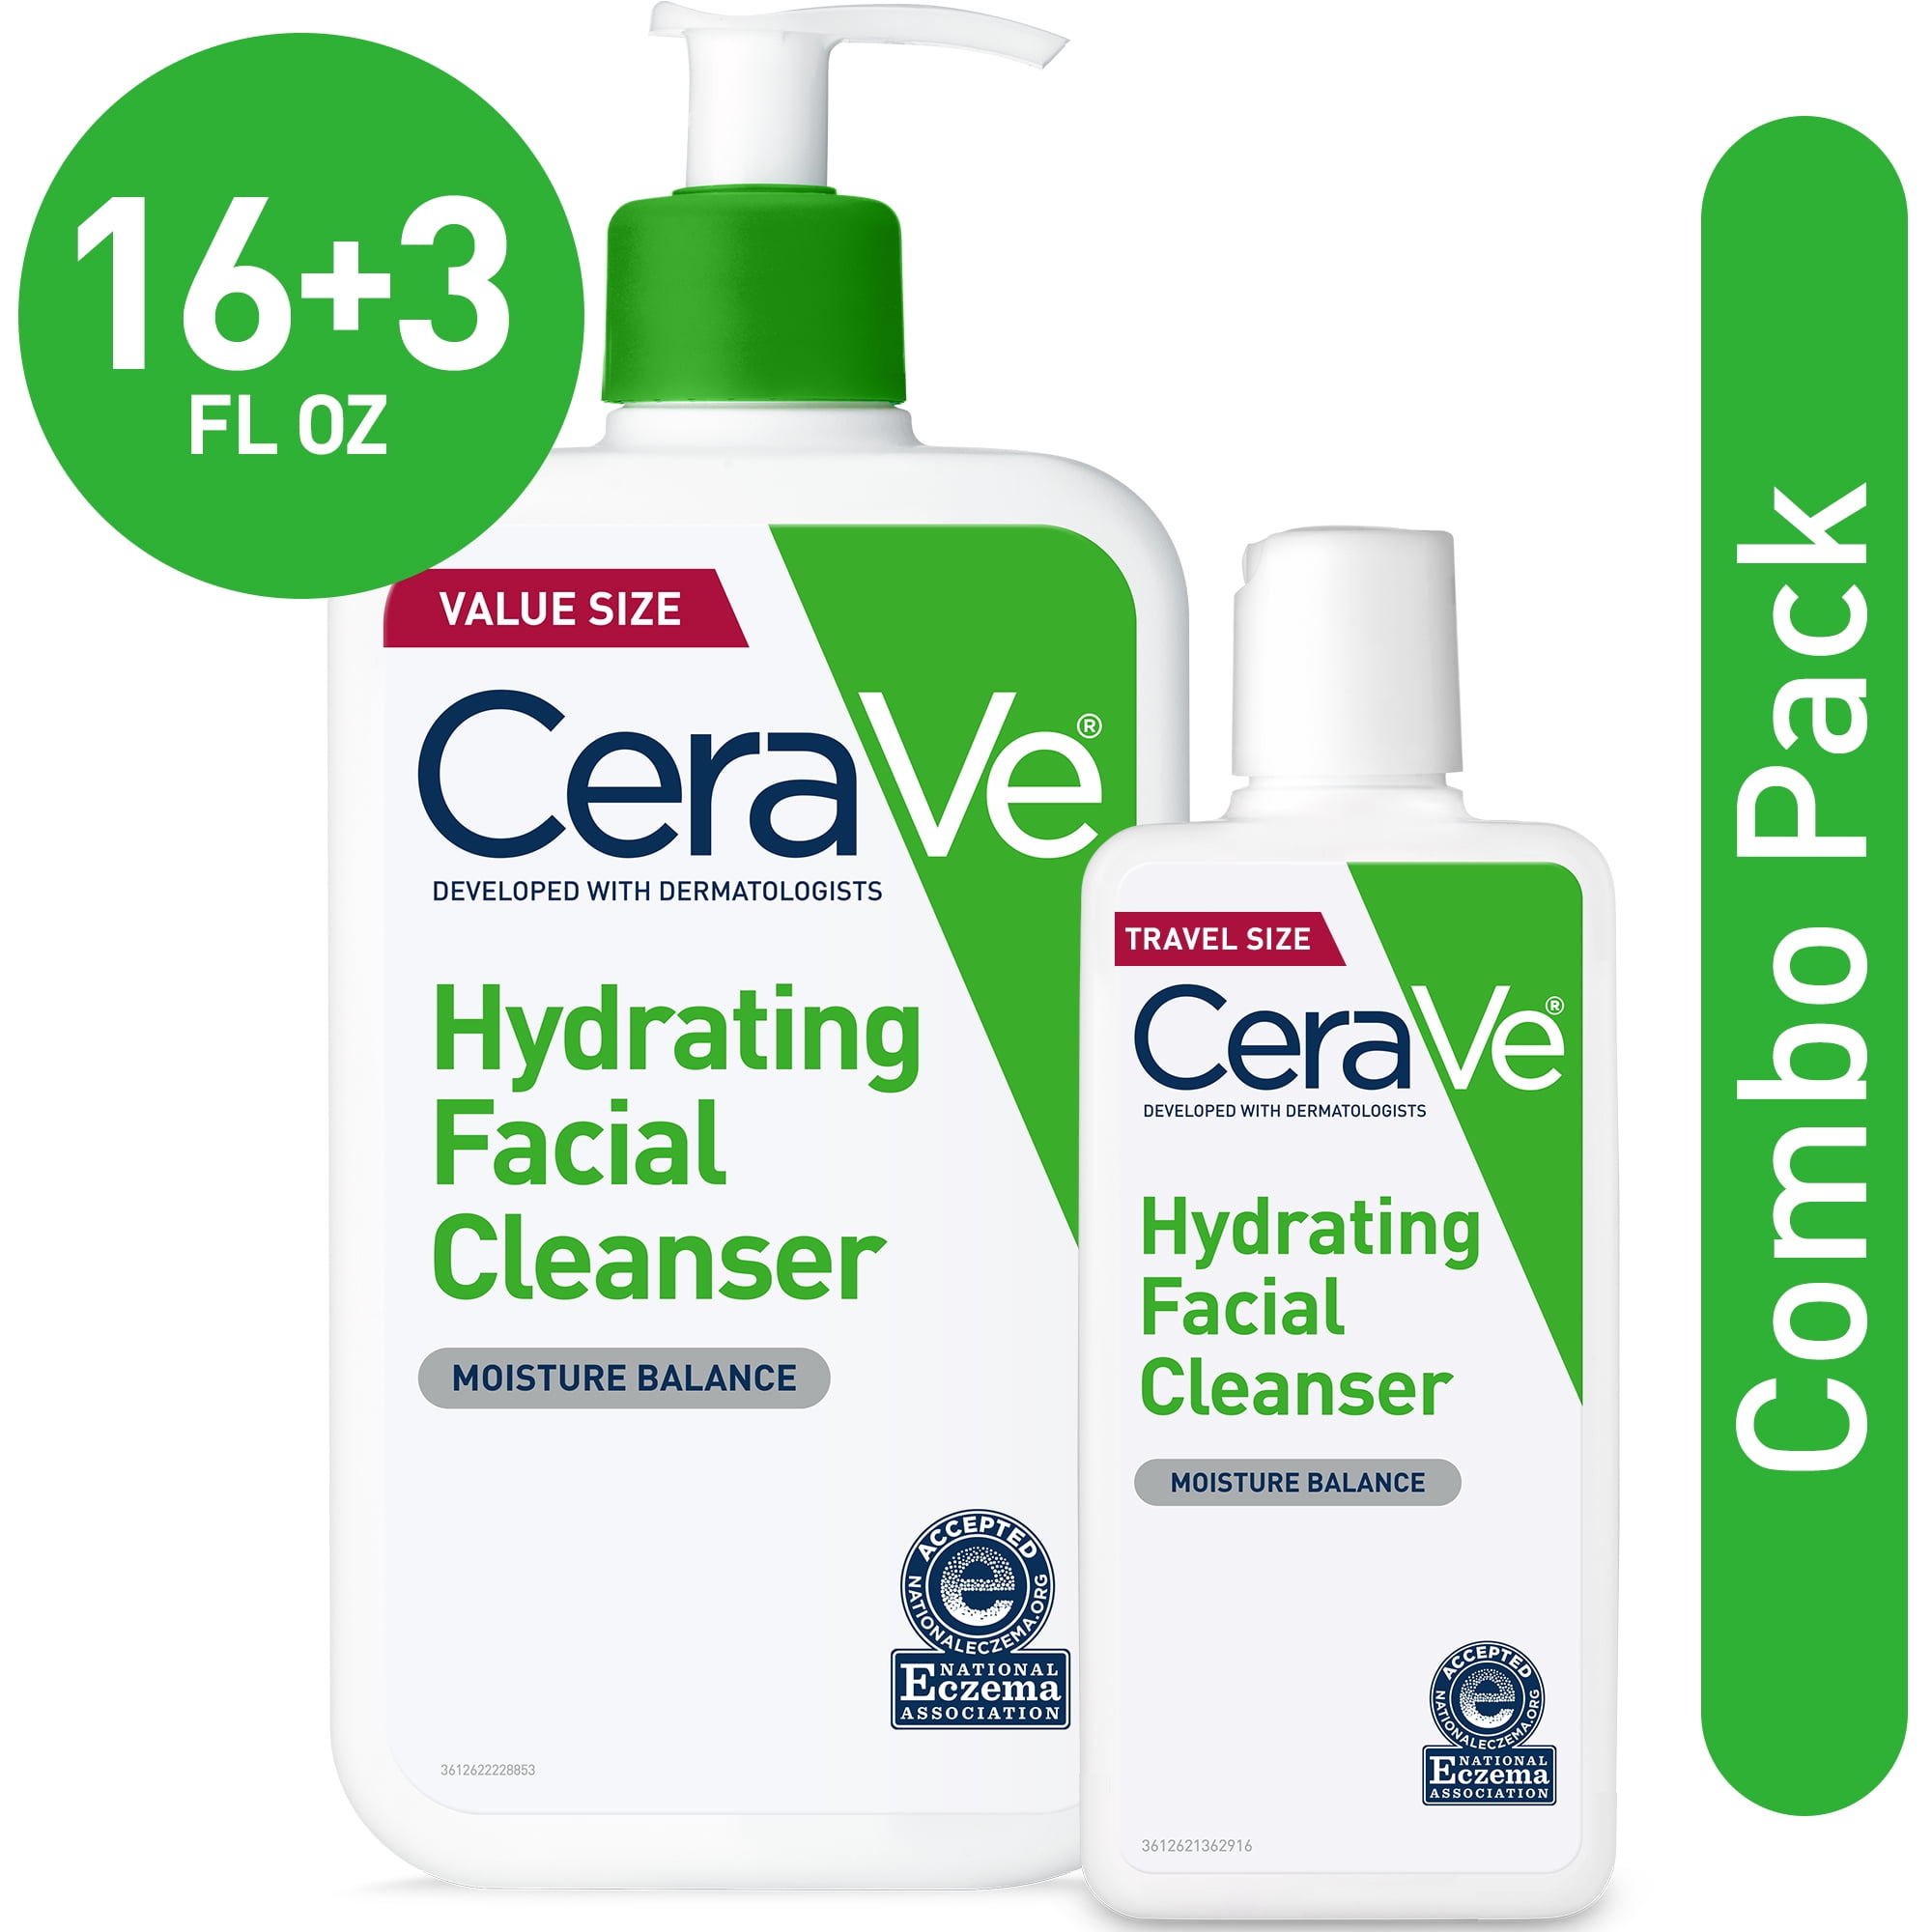 CeraVe Hydrating Face Wash, Facial Cleanser for Normal to Dry Skin, Value Pack, 16 oz Pump & 3 oz Travel Size